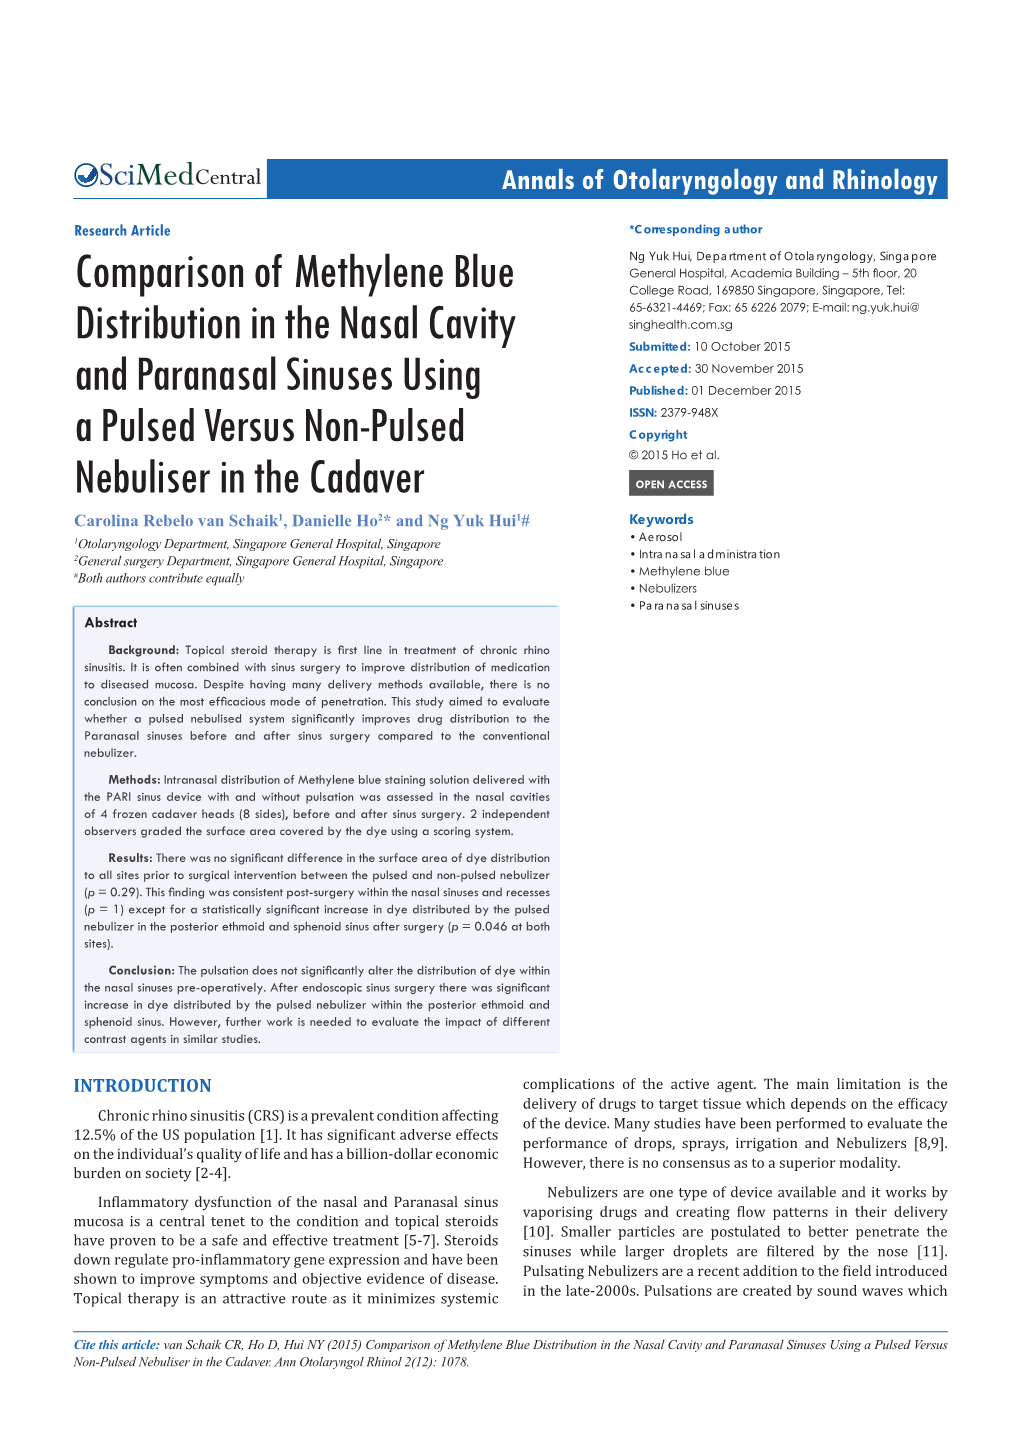 Comparison of Methylene Blue Distribution in the Nasal Cavity and Paranasal Sinuses Using a Pulsed Versus Non-Pulsed Nebuliser in the Cadaver